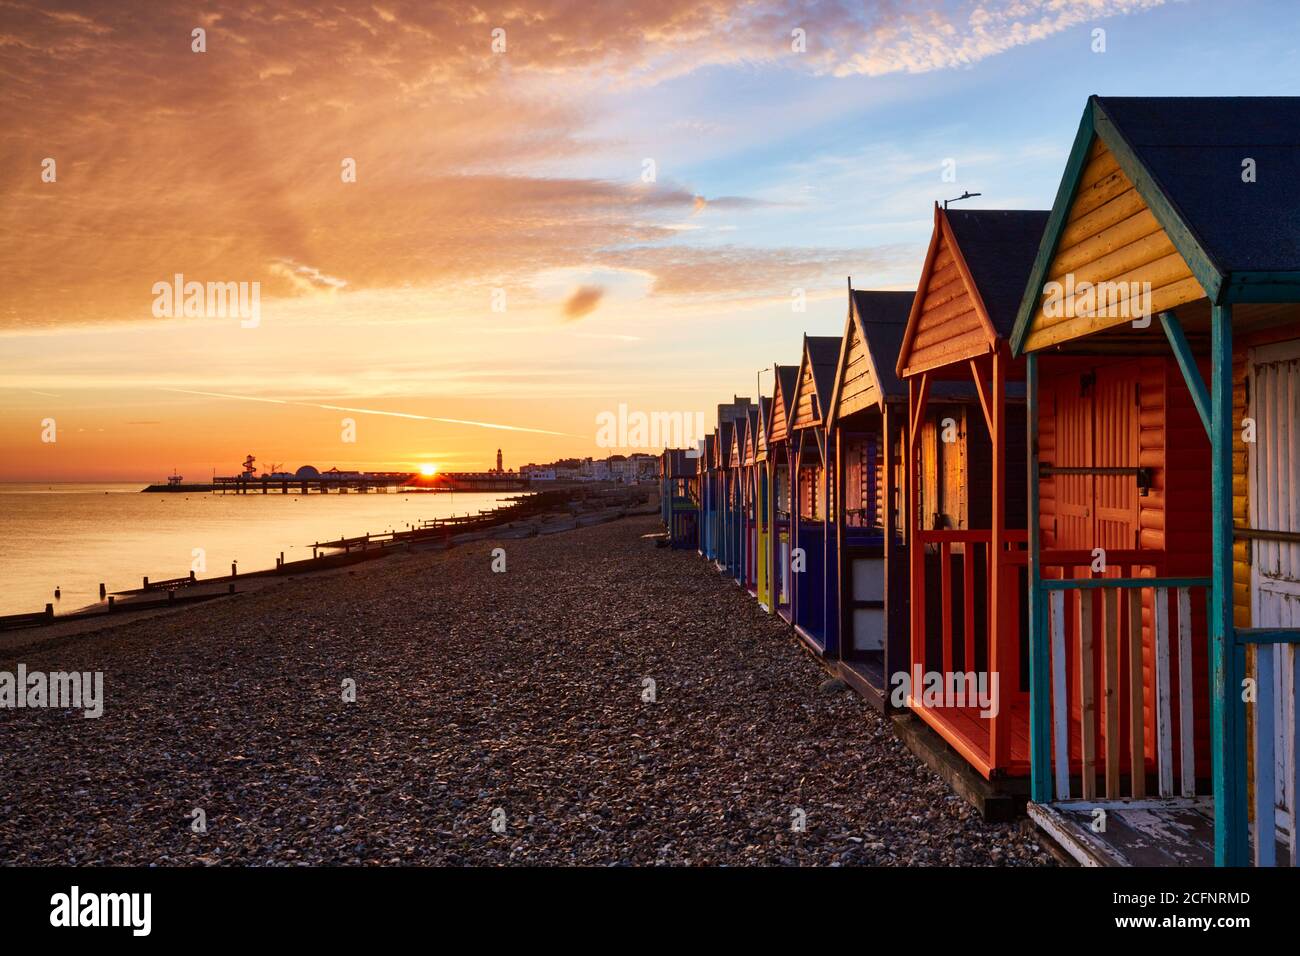 Herne Bay, Kent, UK. 7th September 2020: UK Weather. Sunrise at Herne Bay in Kent as warm weather is set for the week ahead in the South East with an Indian summer, a period of warm dry weather in September being forecast.  Credit: Alan Payton/Alamy Live News Stock Photo